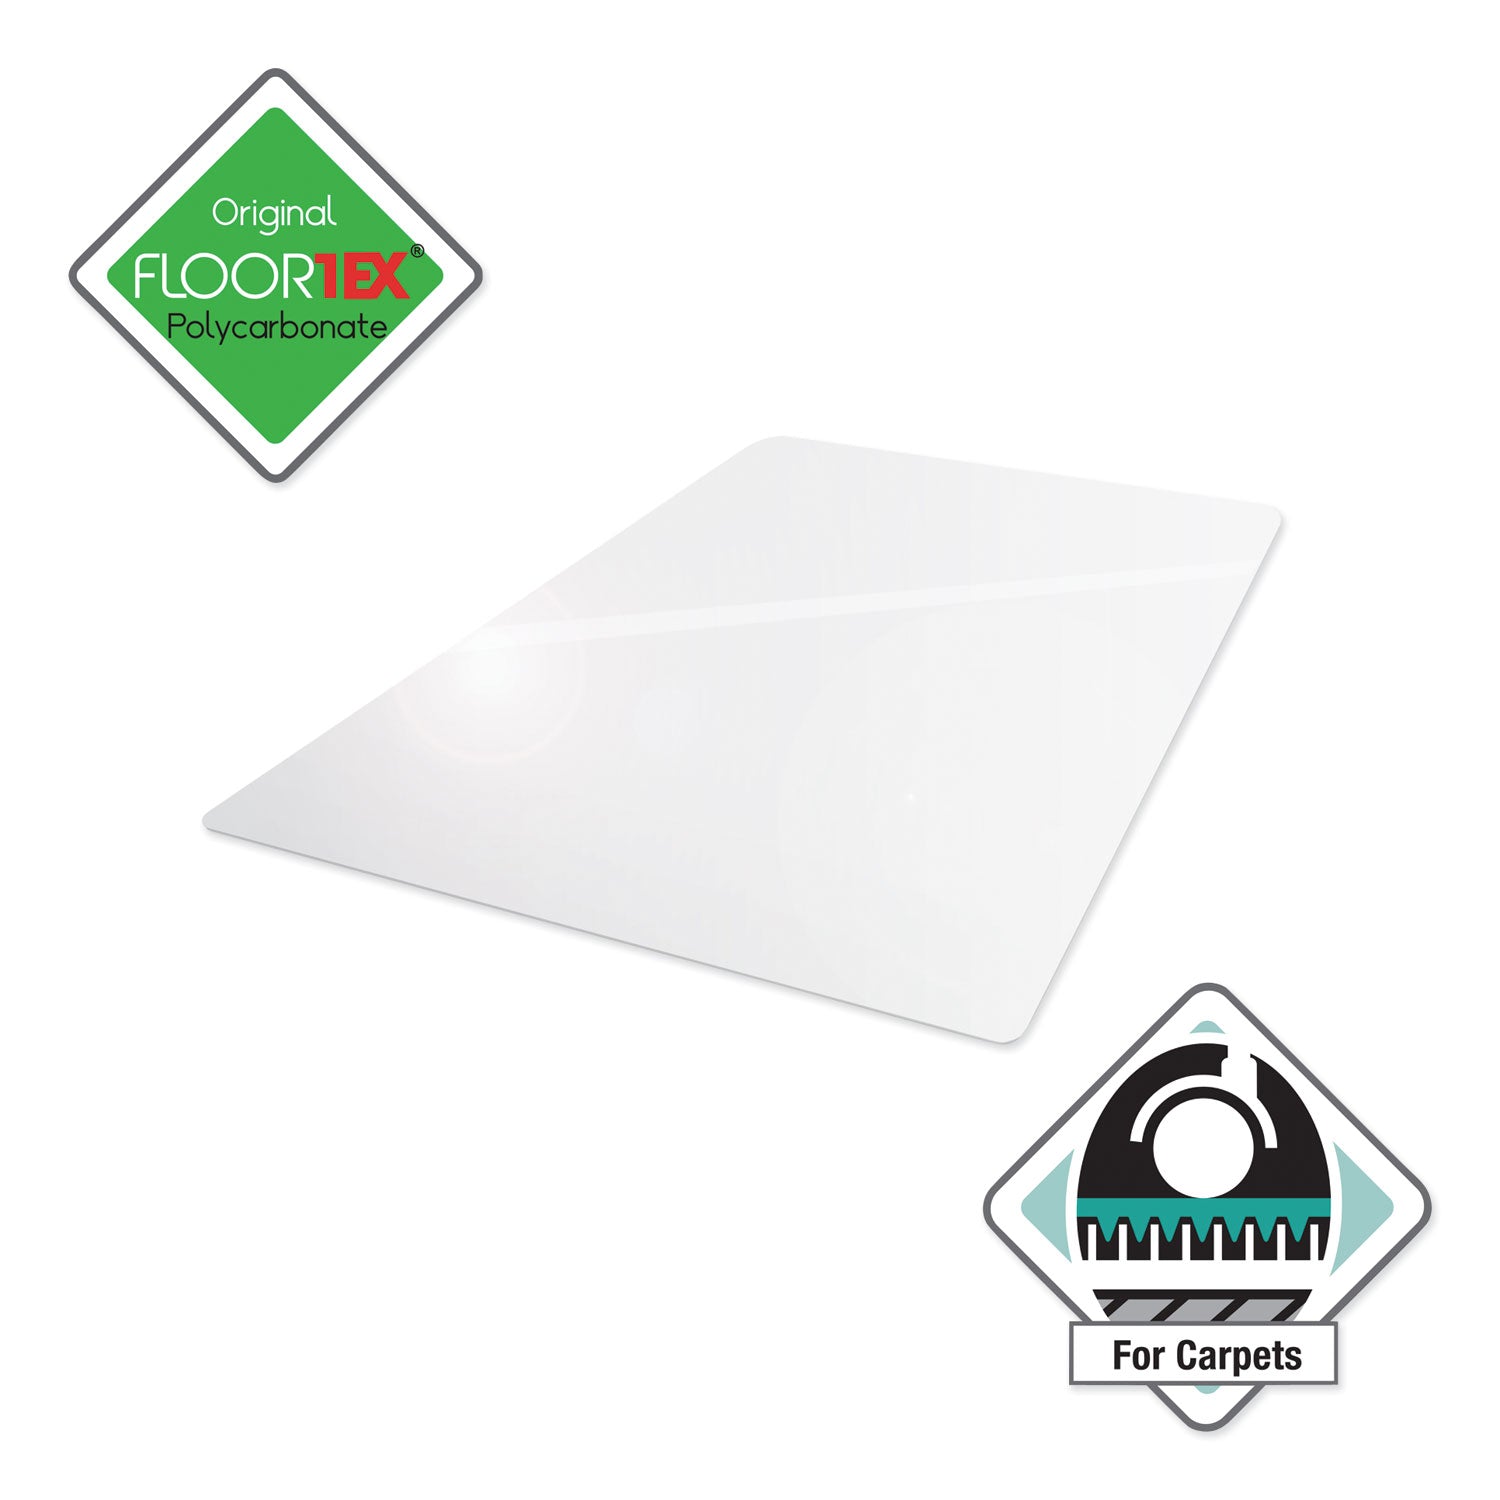 cleartex-ultimat-polycarbonate-chair-mat-for-high-pile-carpets-60-x-48-clear_flrer1115227er - 4